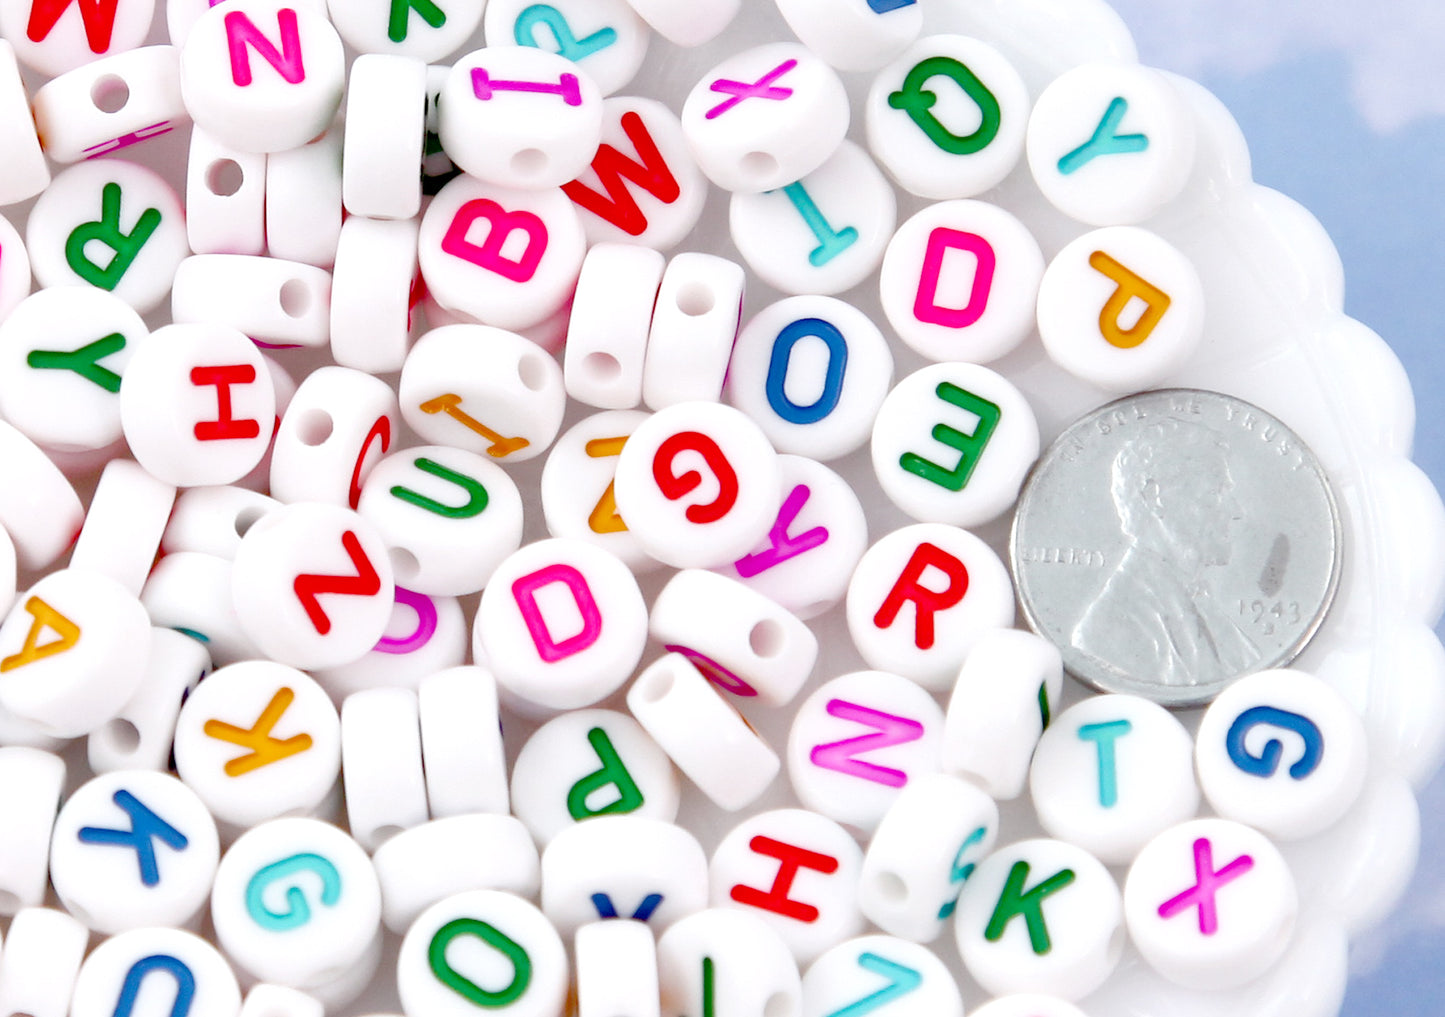 Big Letter Beads - 10mm Large Round Colorful White Alphabet Acrylic or Resin Beads - 170 pc set